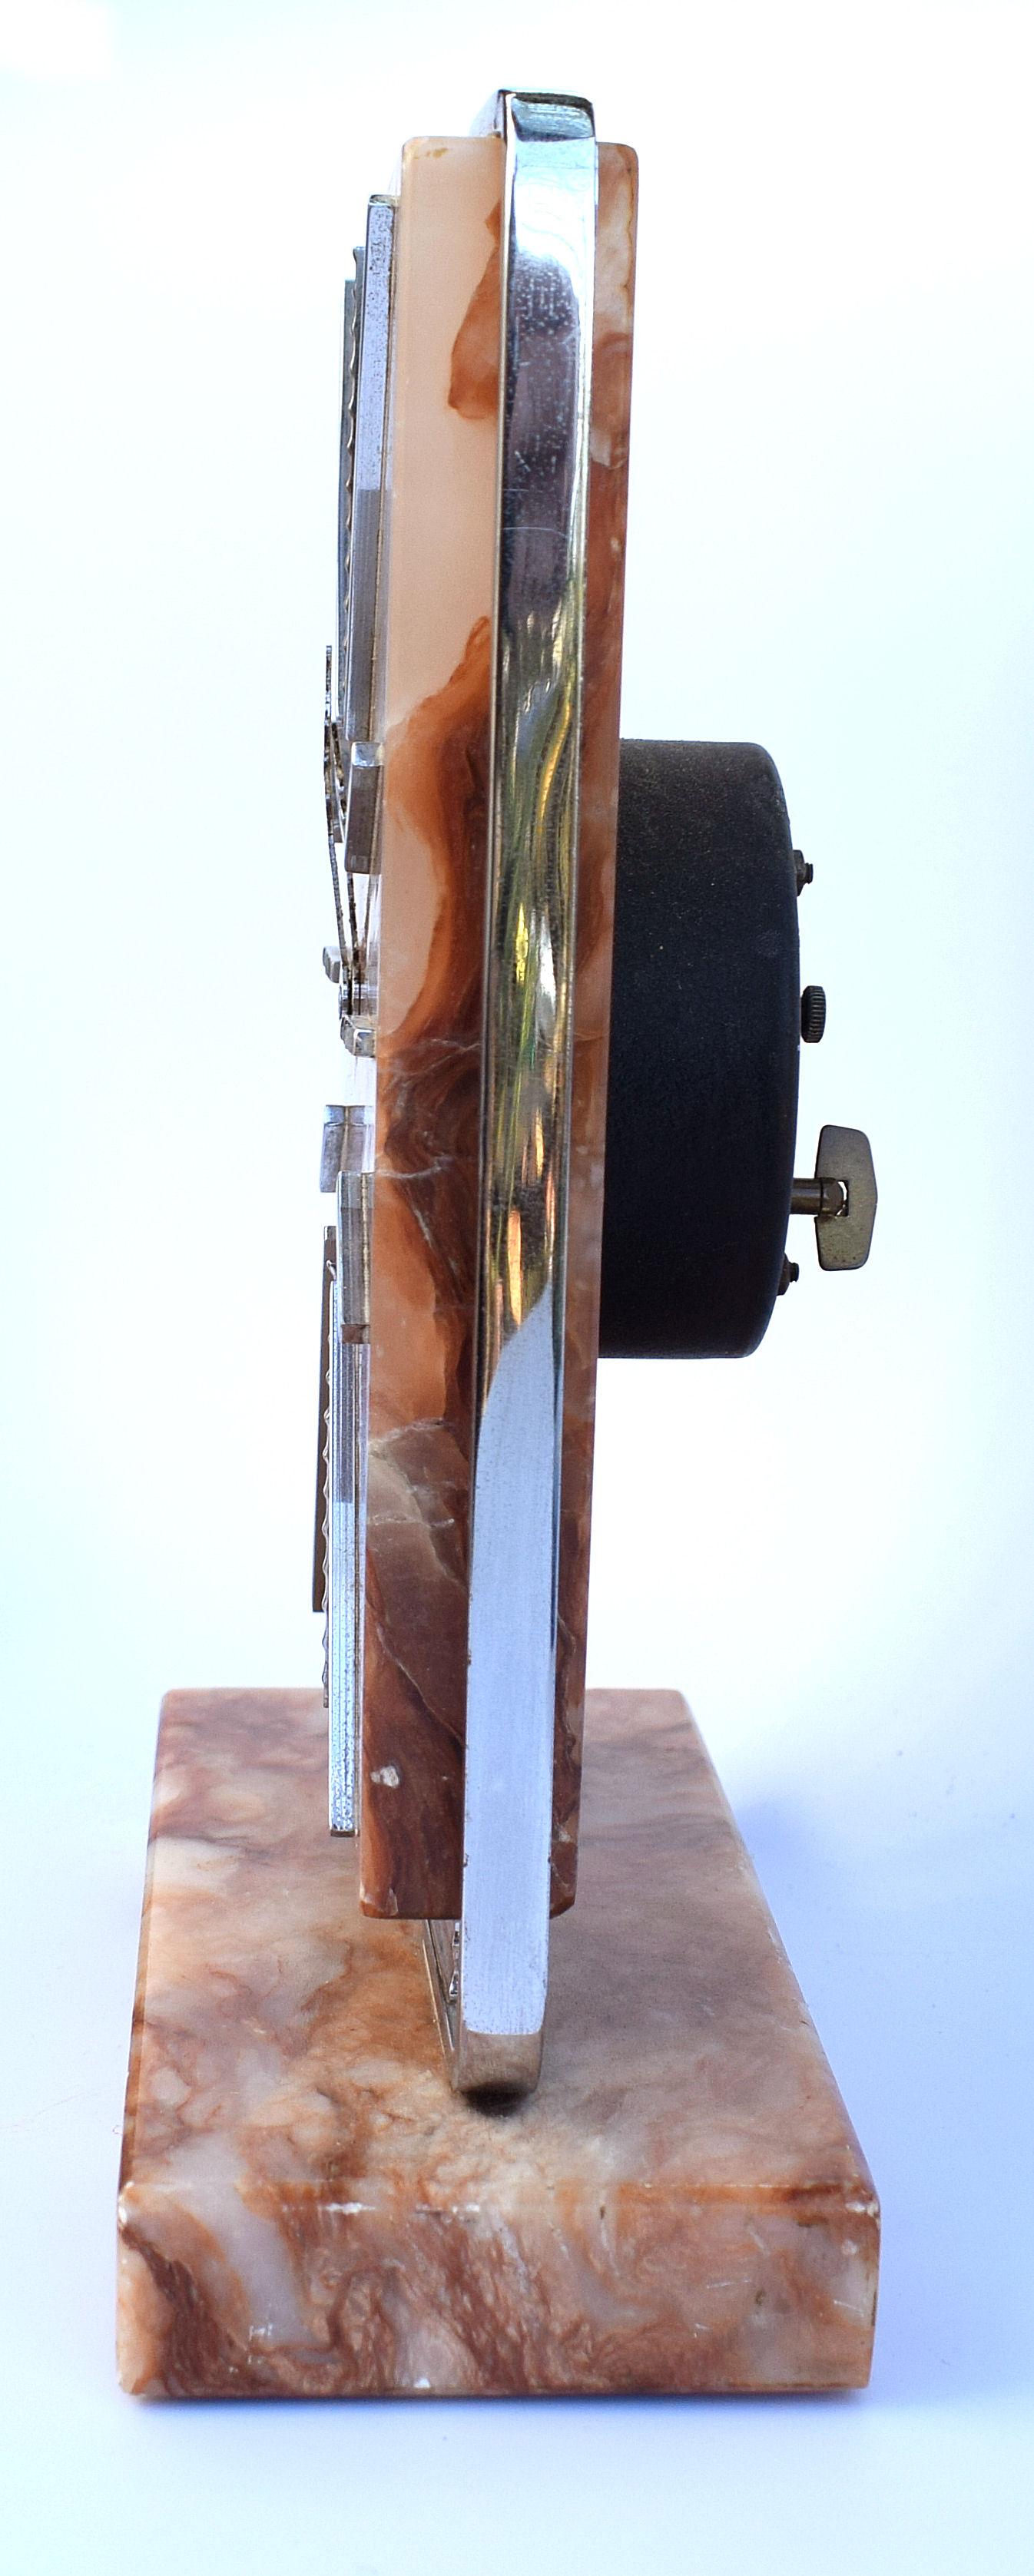 Very impressive Art Deco modernist English clock, made from onyx and dating to the 1930s. The case is solid multicolored onyx, the frame and numerals are chromed metal. A rare design not often found. Really nice size and ideal as a mantle or desk